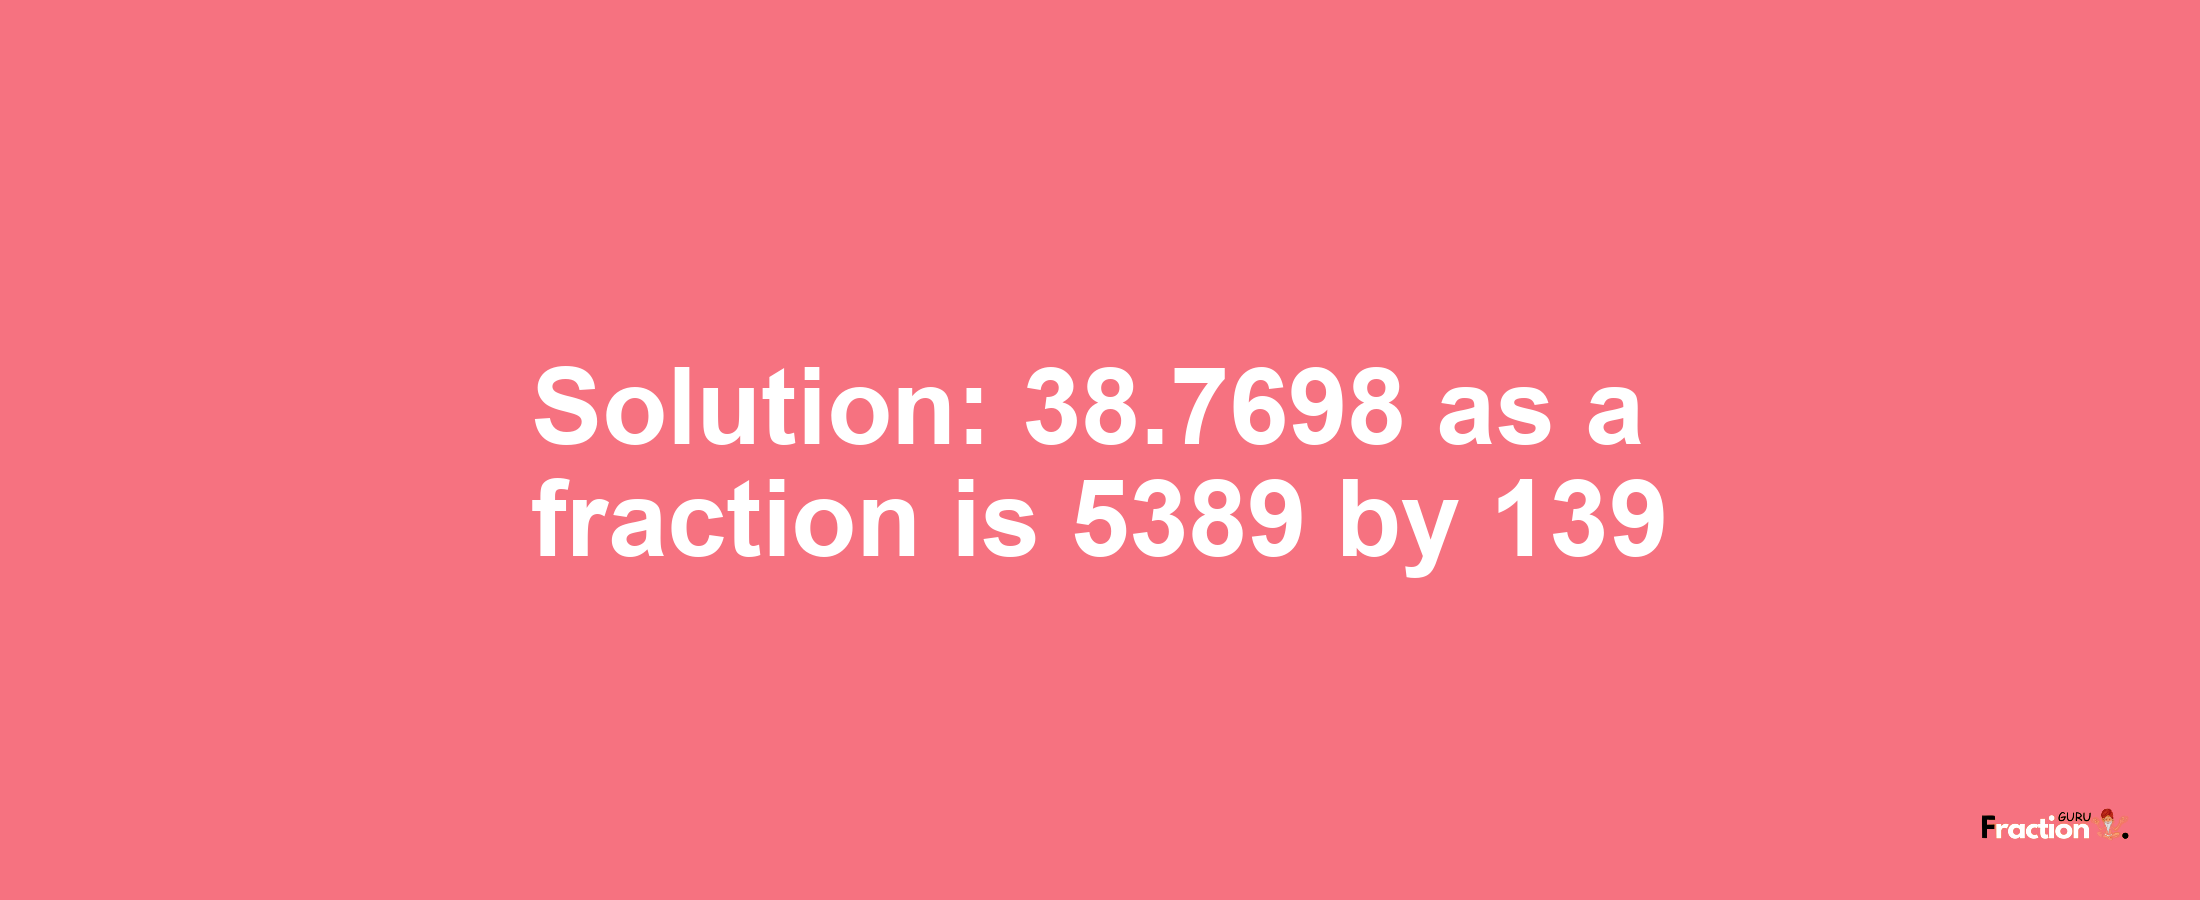 Solution:38.7698 as a fraction is 5389/139